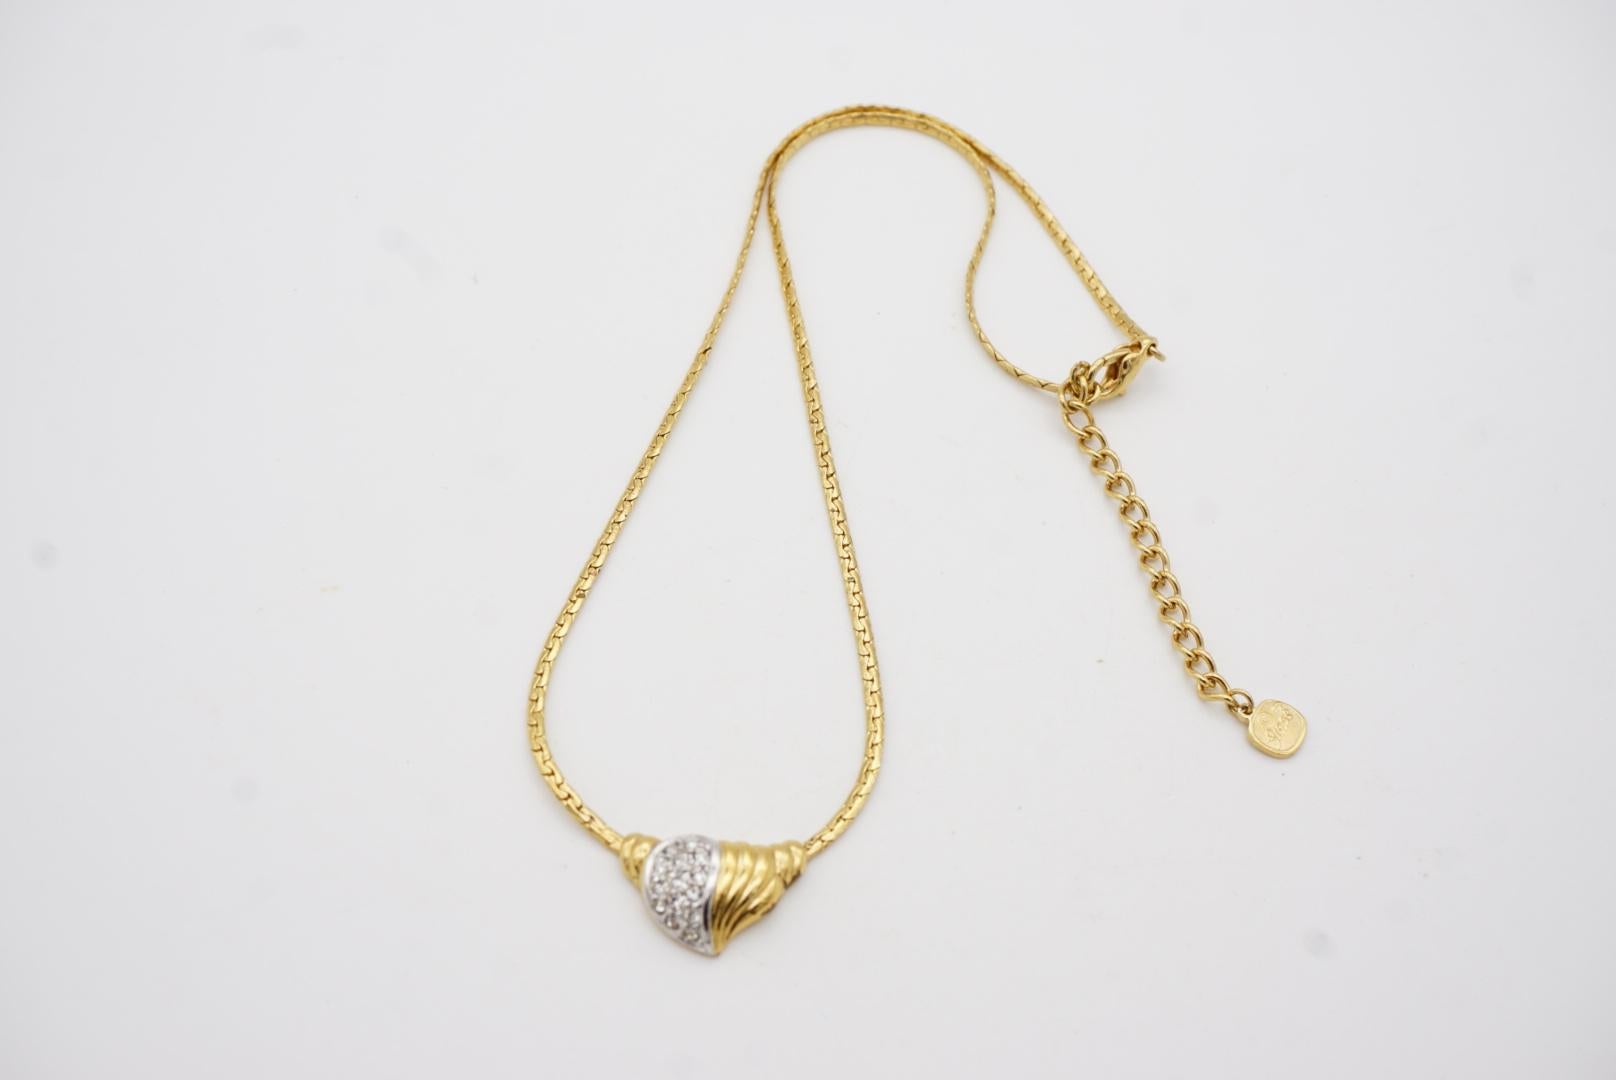 Christian Dior GROSSE 1970s Vintage Crystals Silver Gold Heart Pendant Necklace For Sale 1